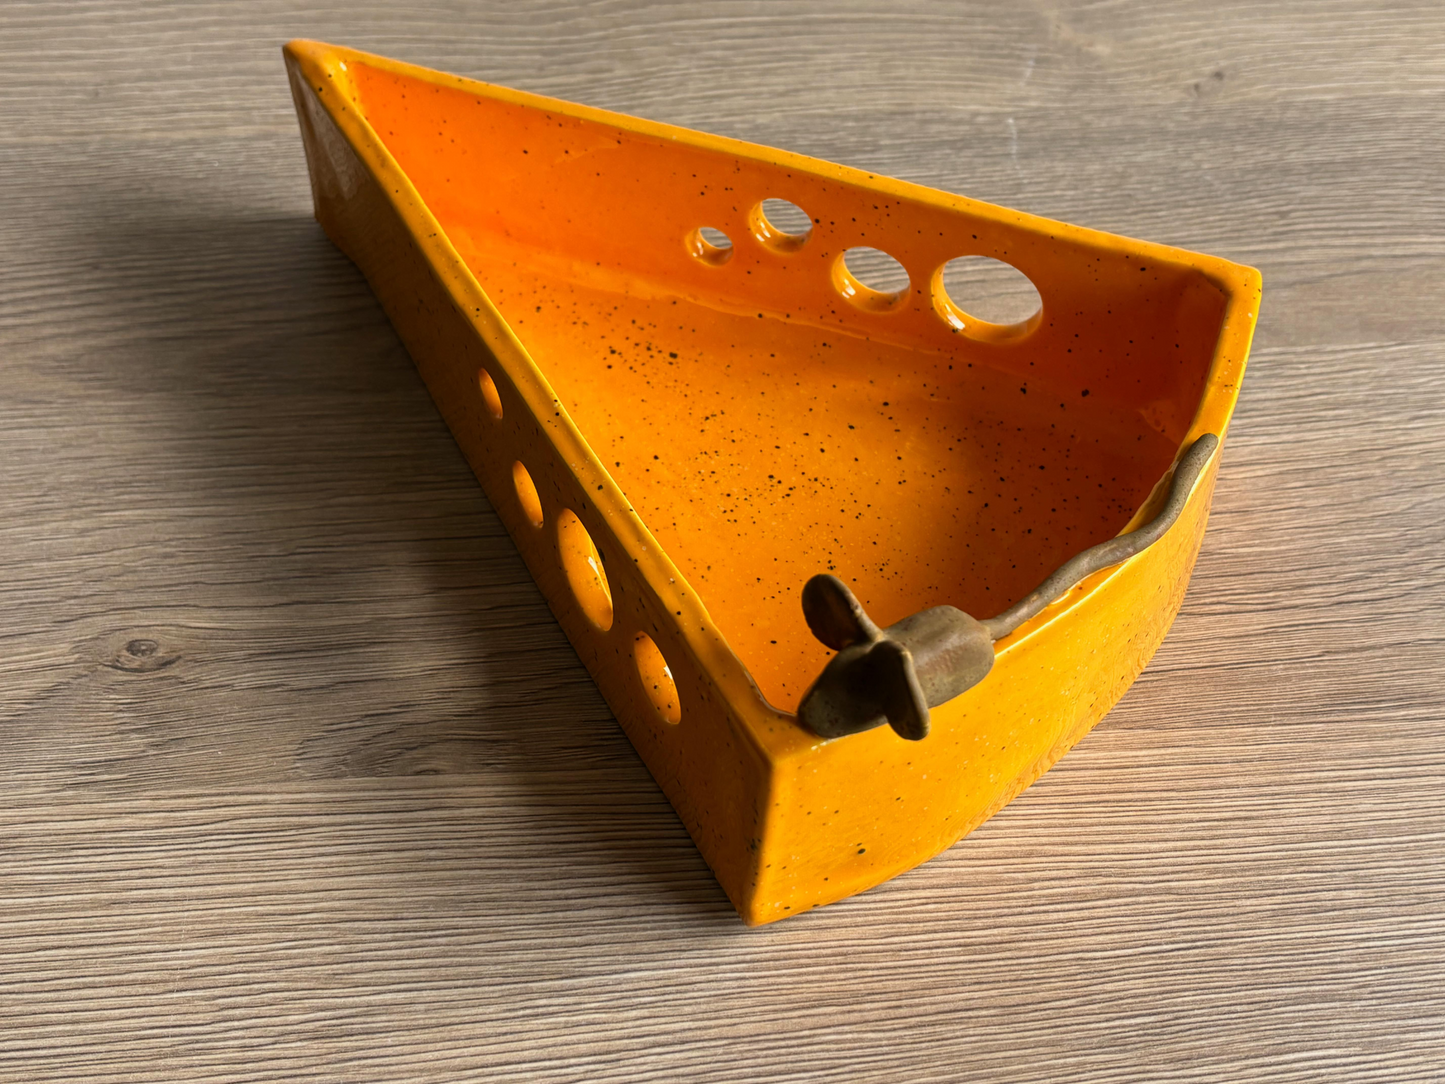 Handmade Cheese and Cracker Dish - Unique Style, Yellow Glaze, 10 Inches x 4 Inches